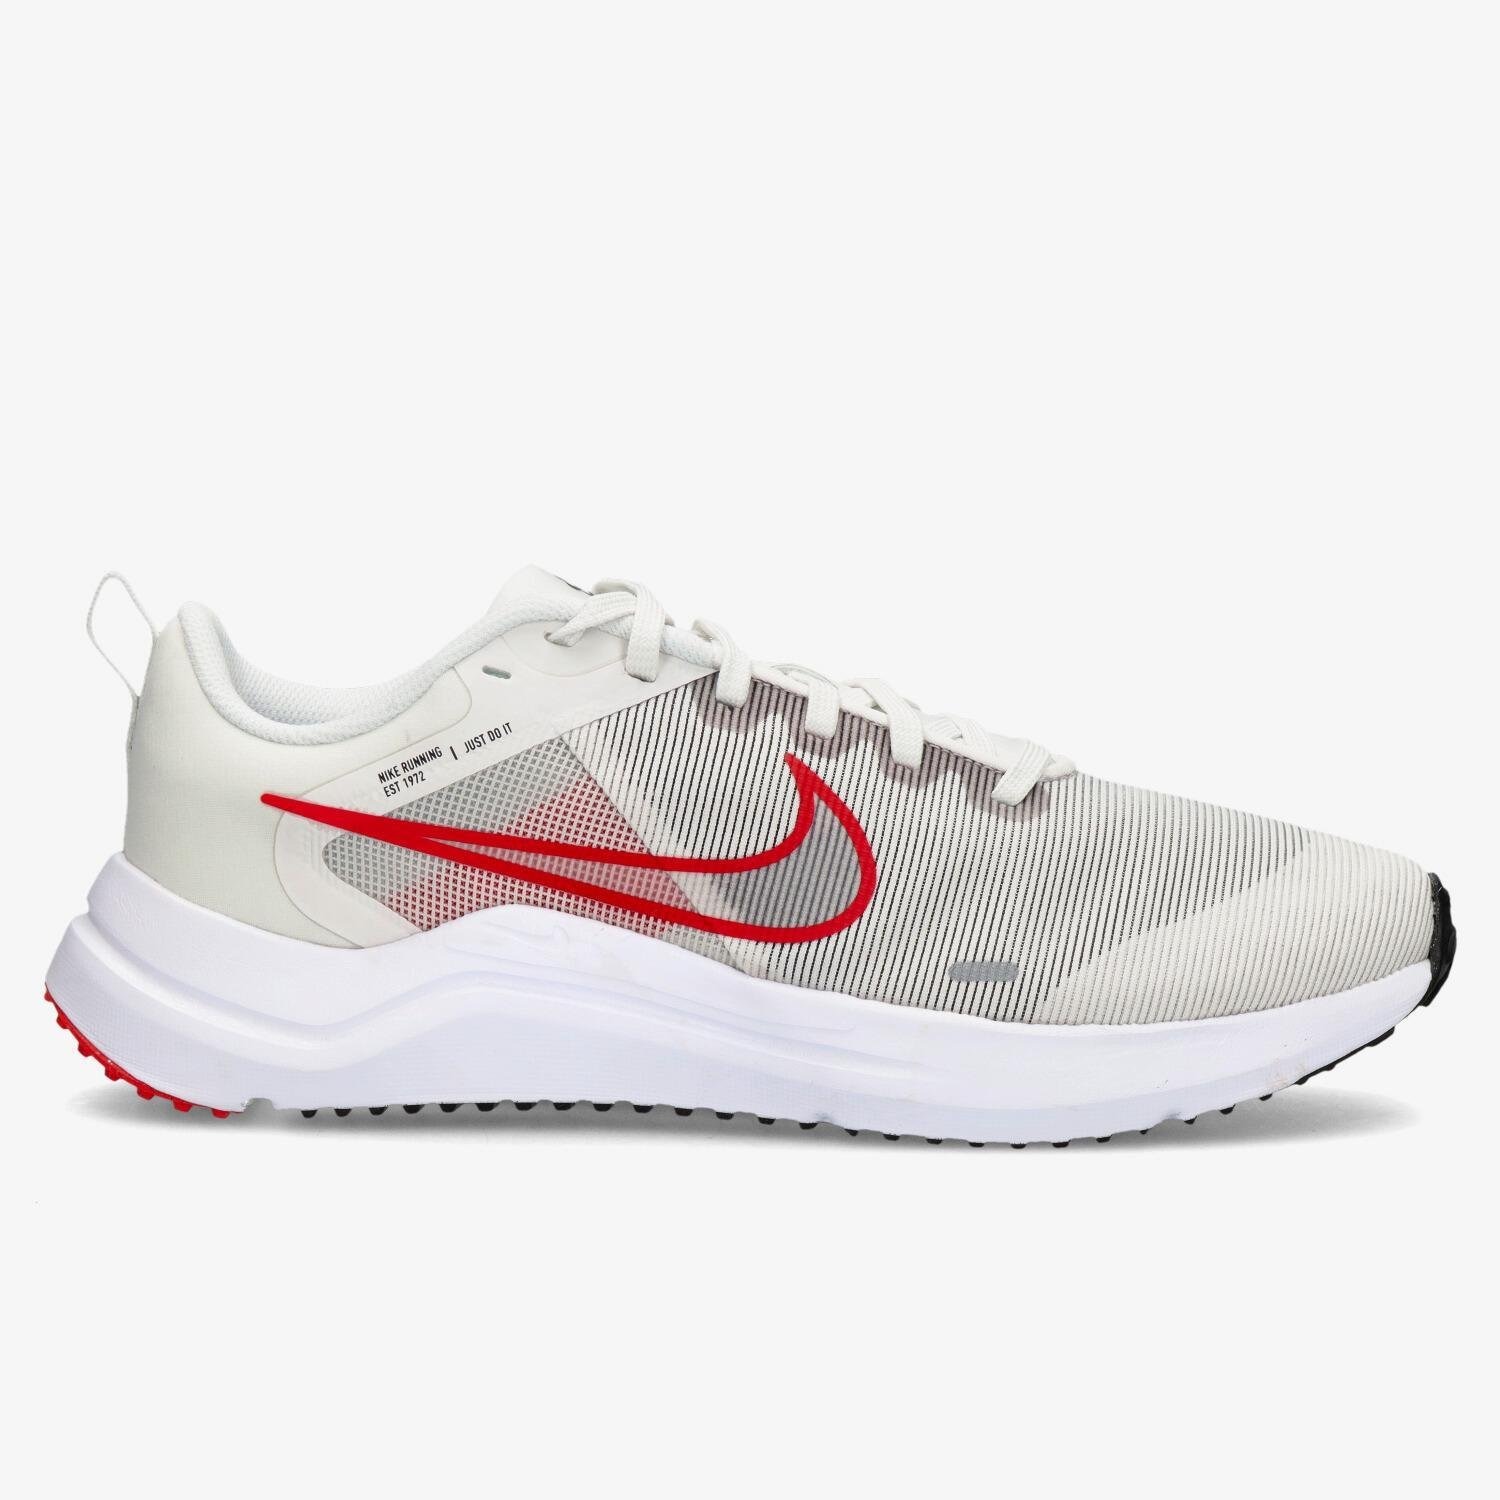 Nike Downshifter 12 Wit-Rood